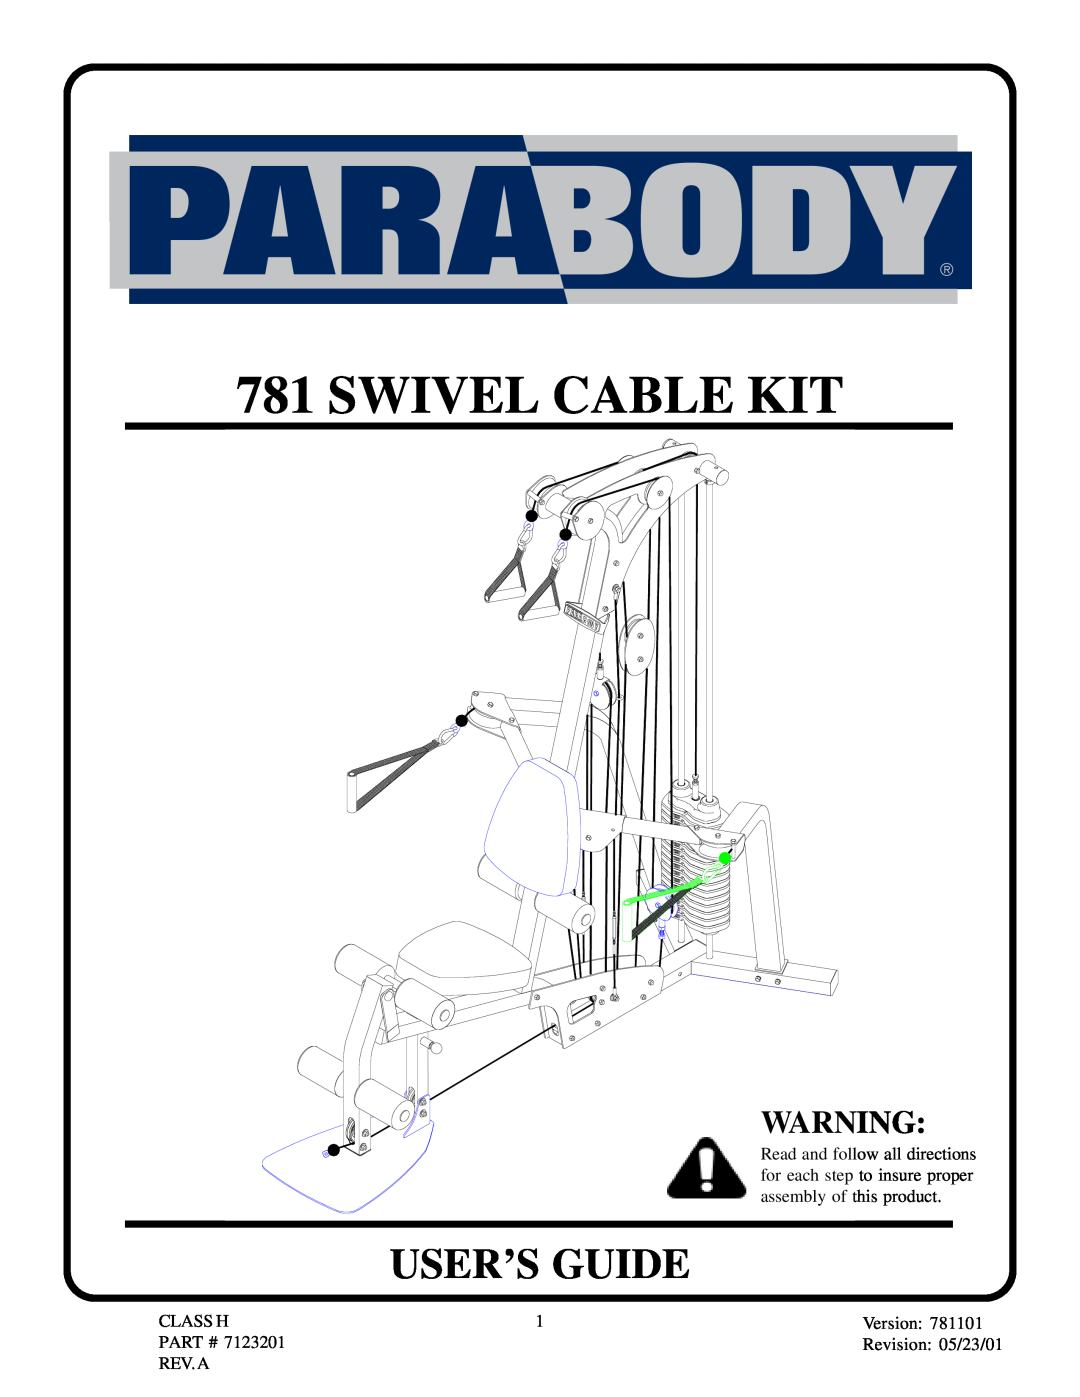 ParaBody 781 manual Class H, Version, Part #, Revision 05/23/01, Rev.A, Swivel Cable Kit, User’S Guide 